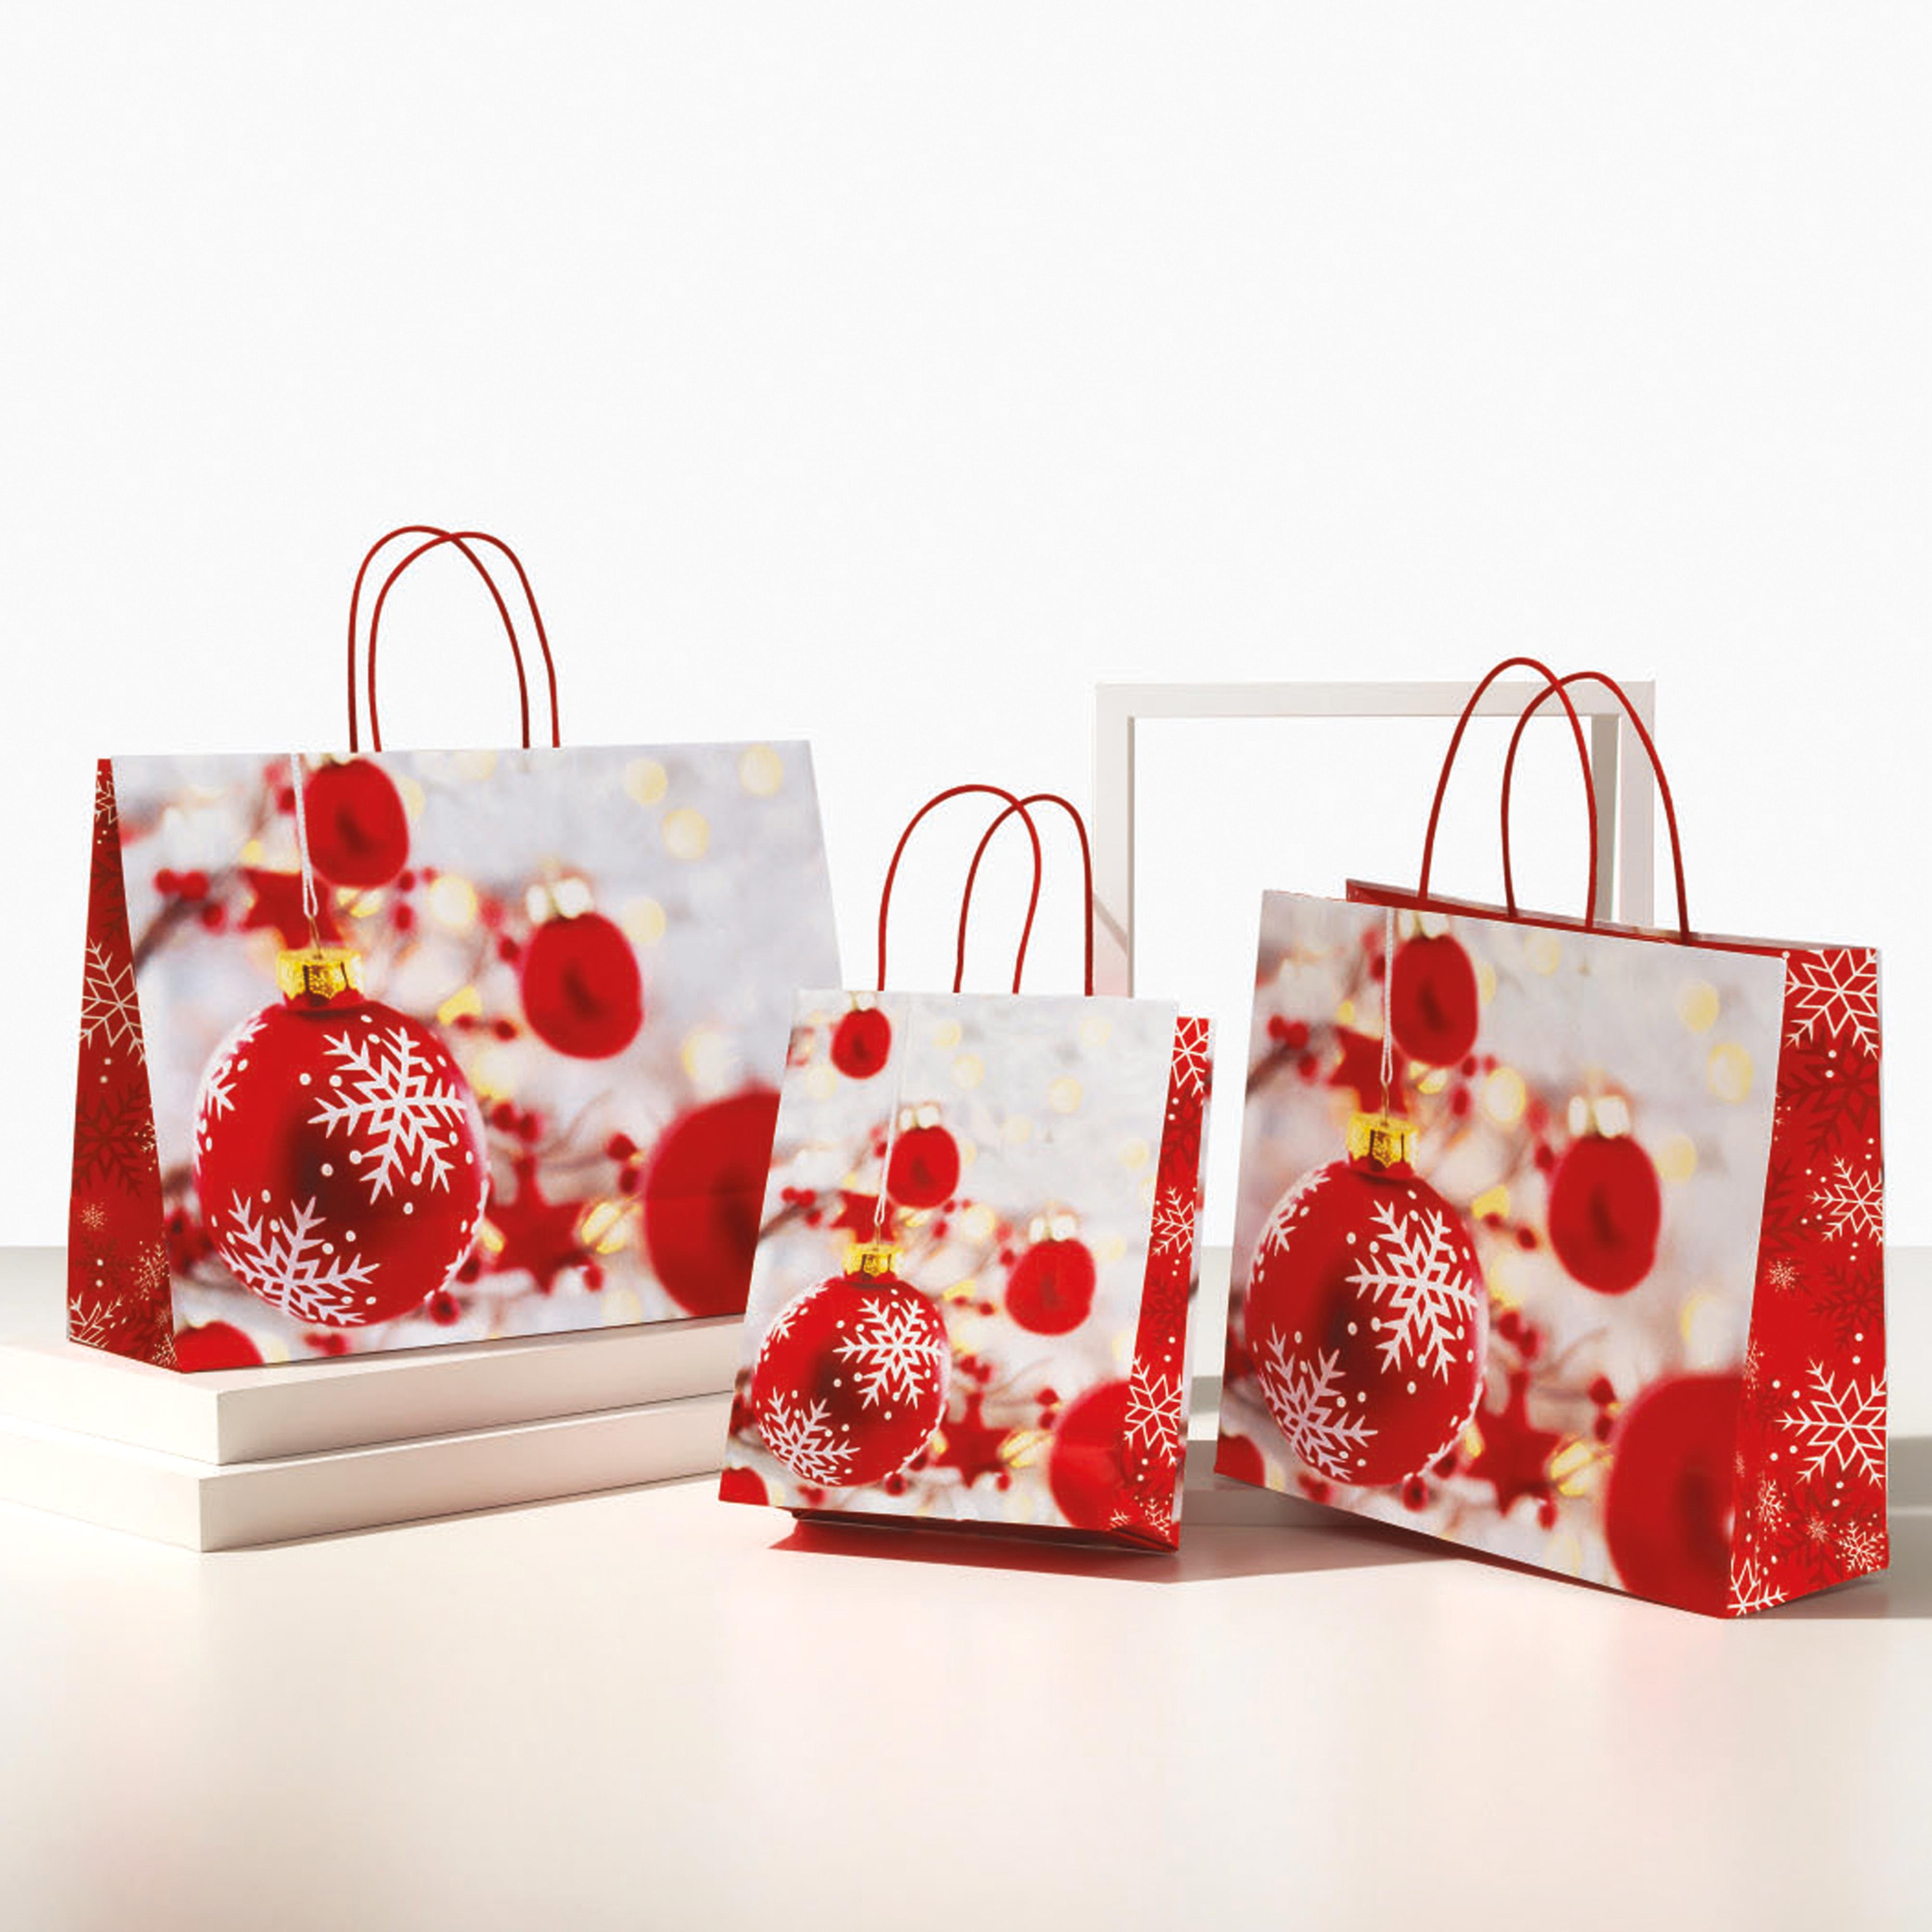 CHRISTMAS ITEMS, BOXES, BASKETS,DISHES, VARIOUS BAGS AND CONTAINERS, SHOPPERS 45+15X43+6 CM NATALIZIE